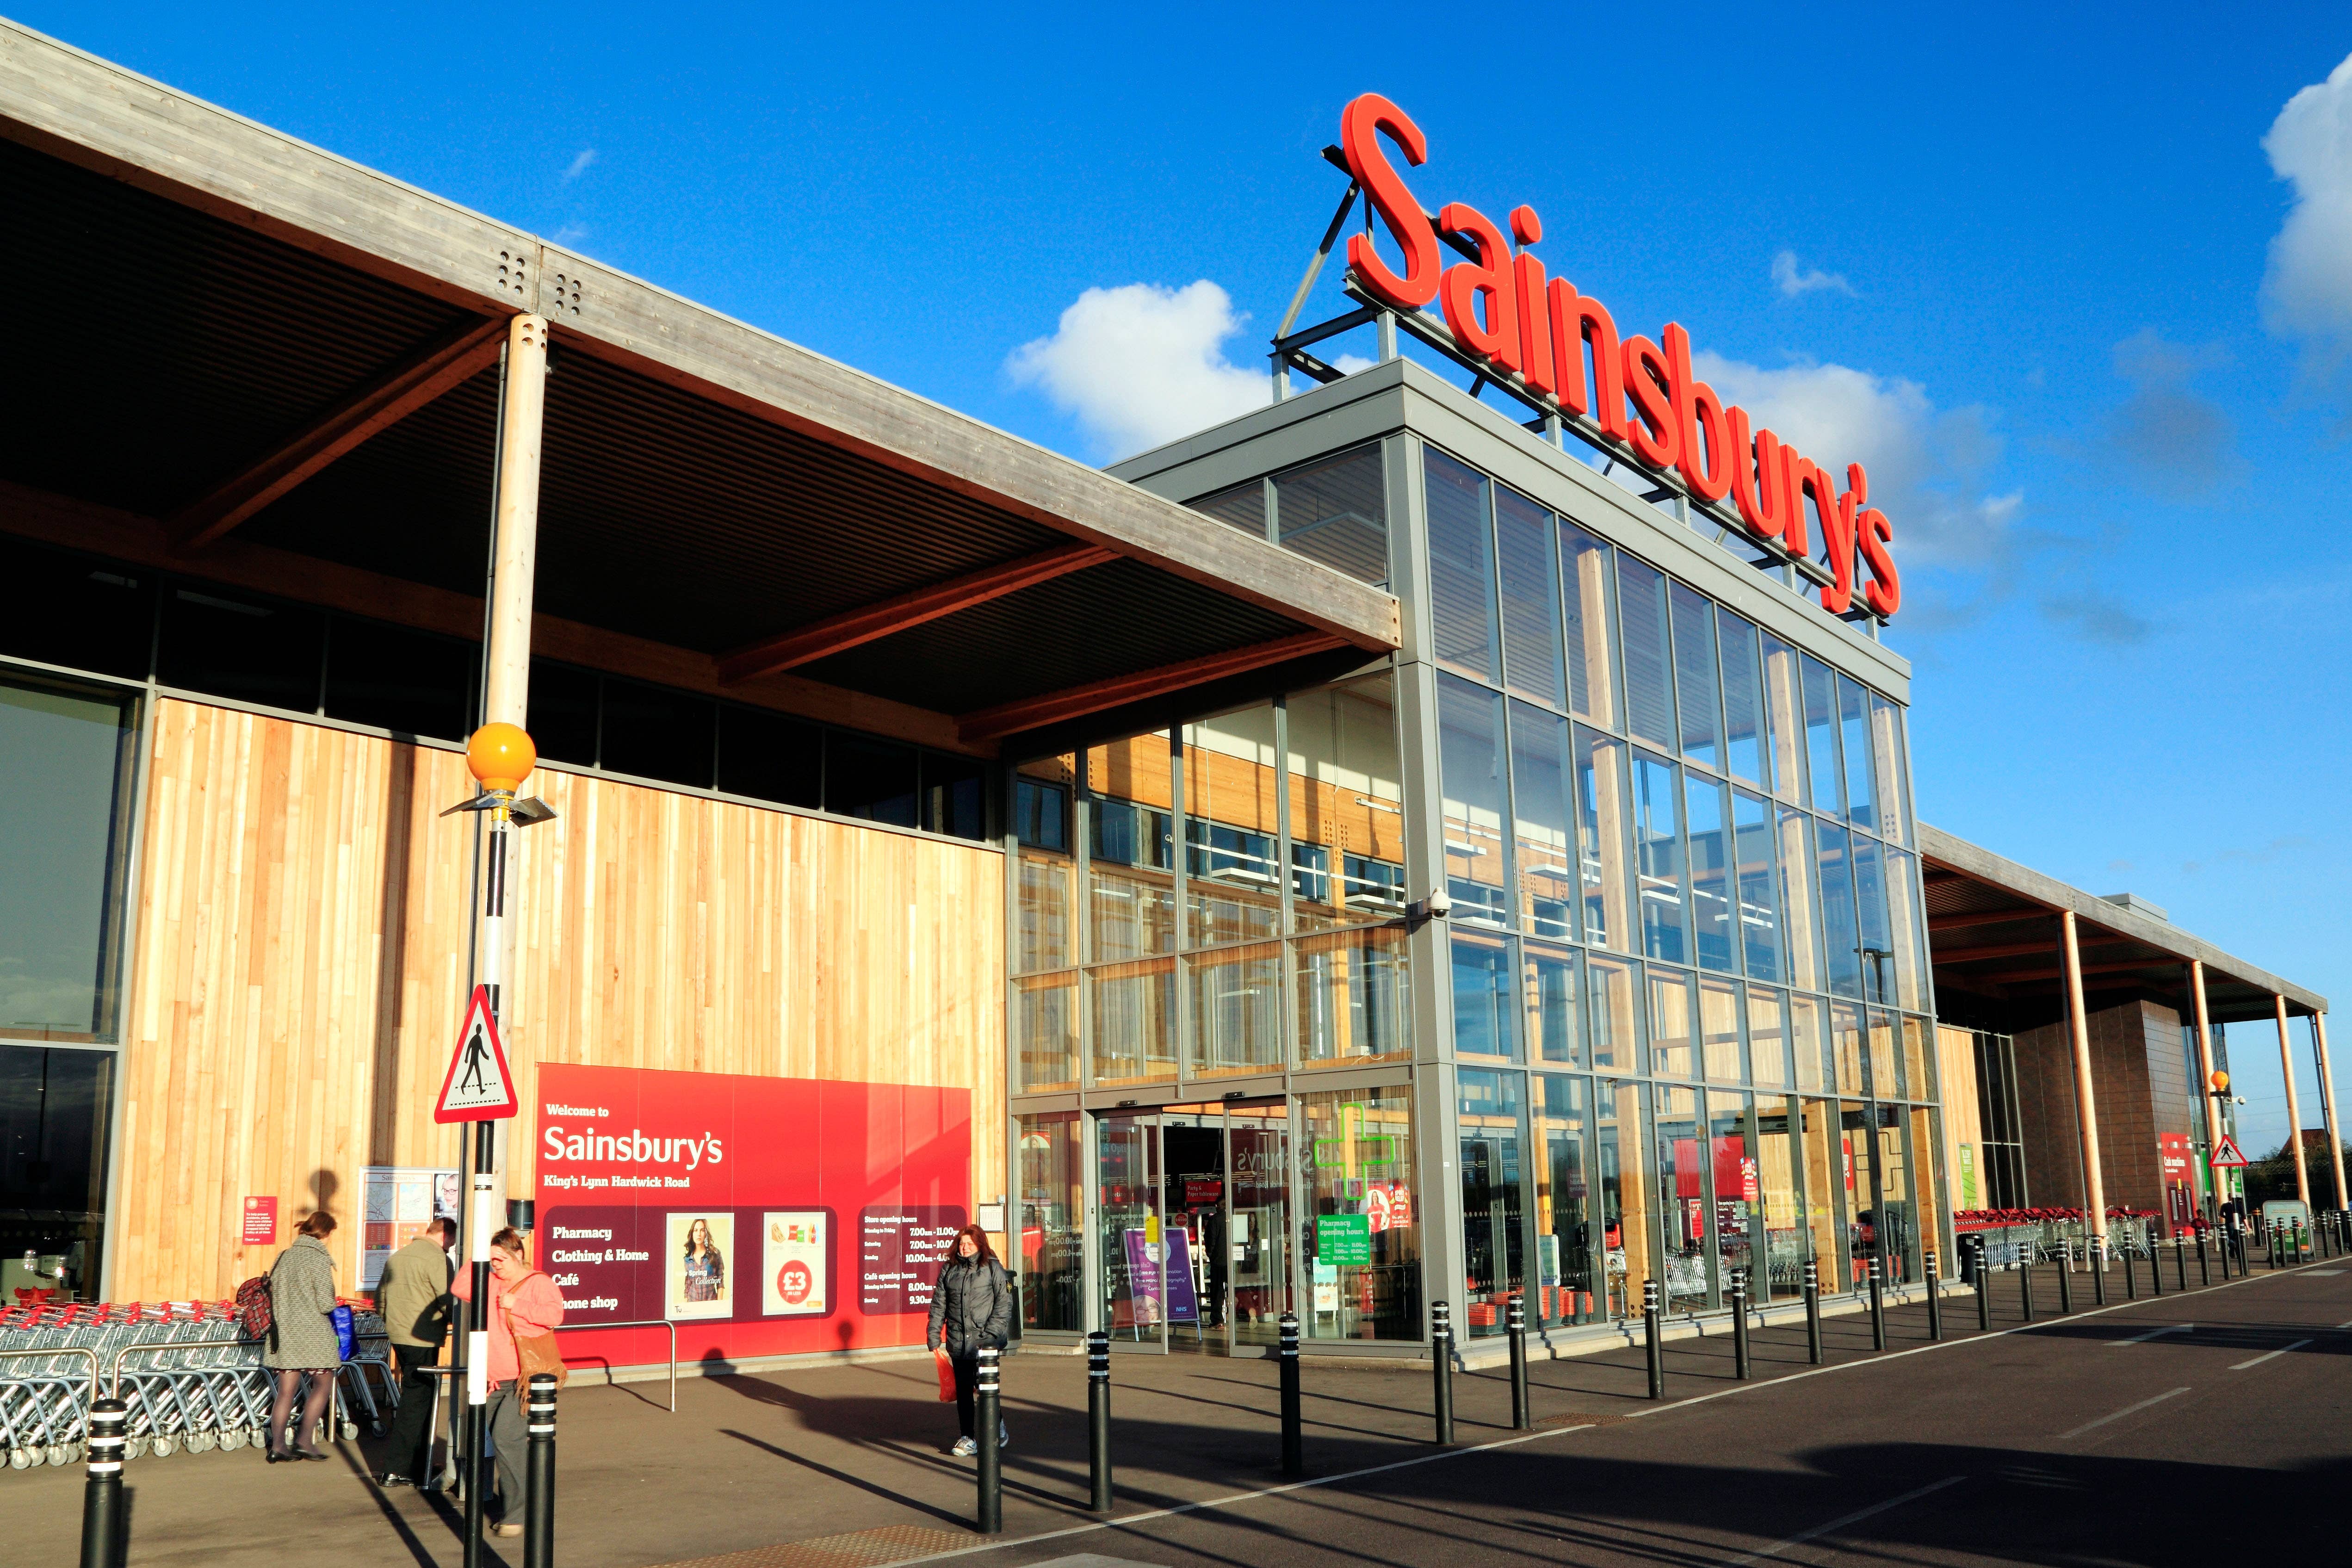 Sainsbury’s, the UK’s second-biggest grocery chain, said total grocery sales increased 7.3 per cent in the fourth quarter